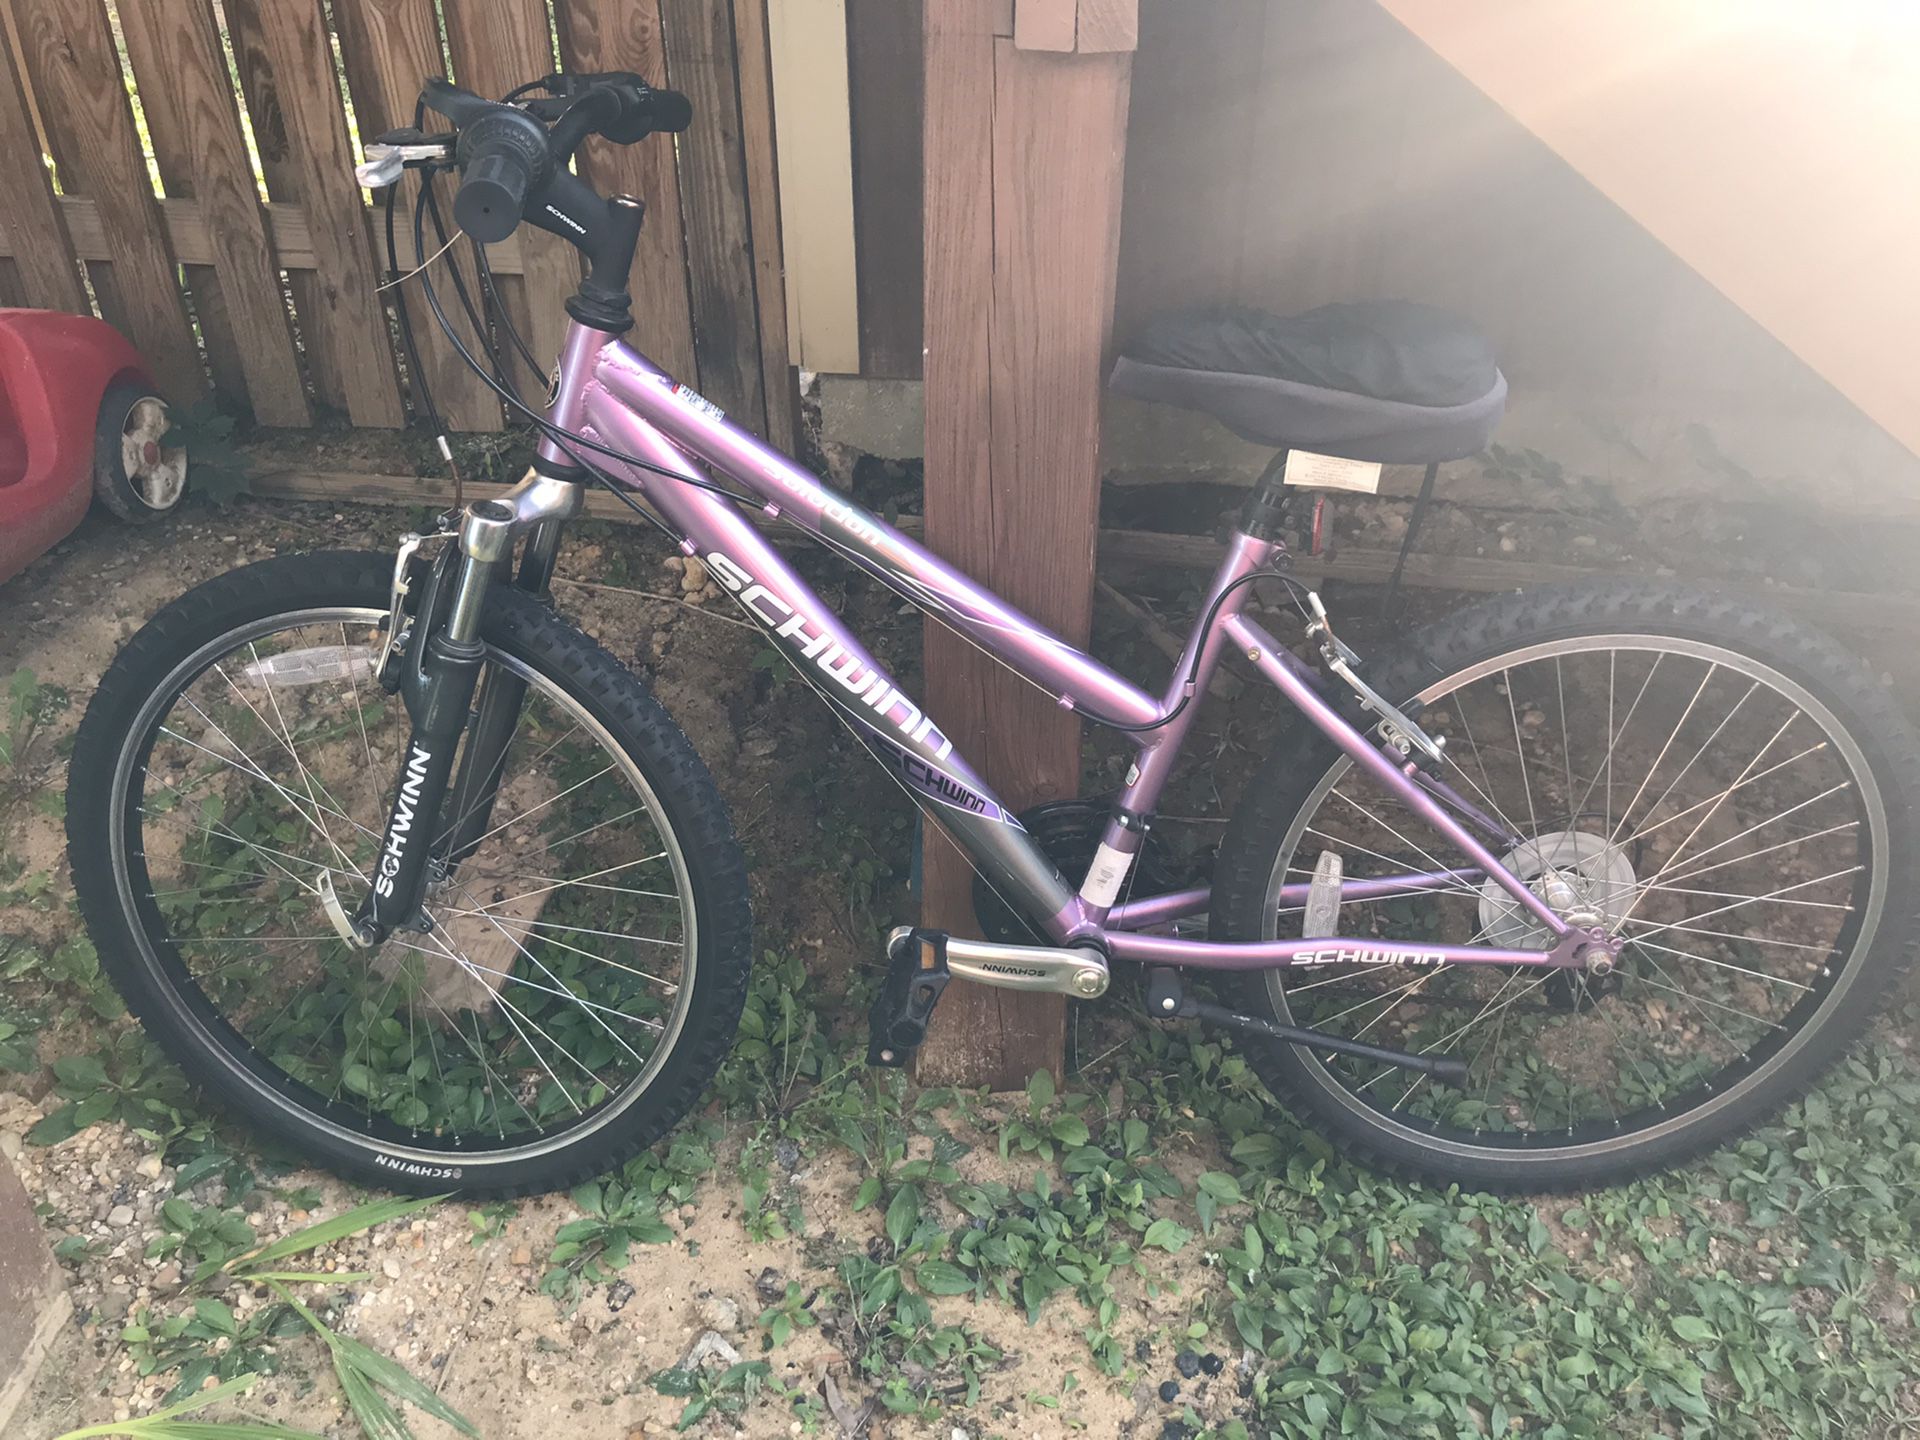 mountain bike must go today $80